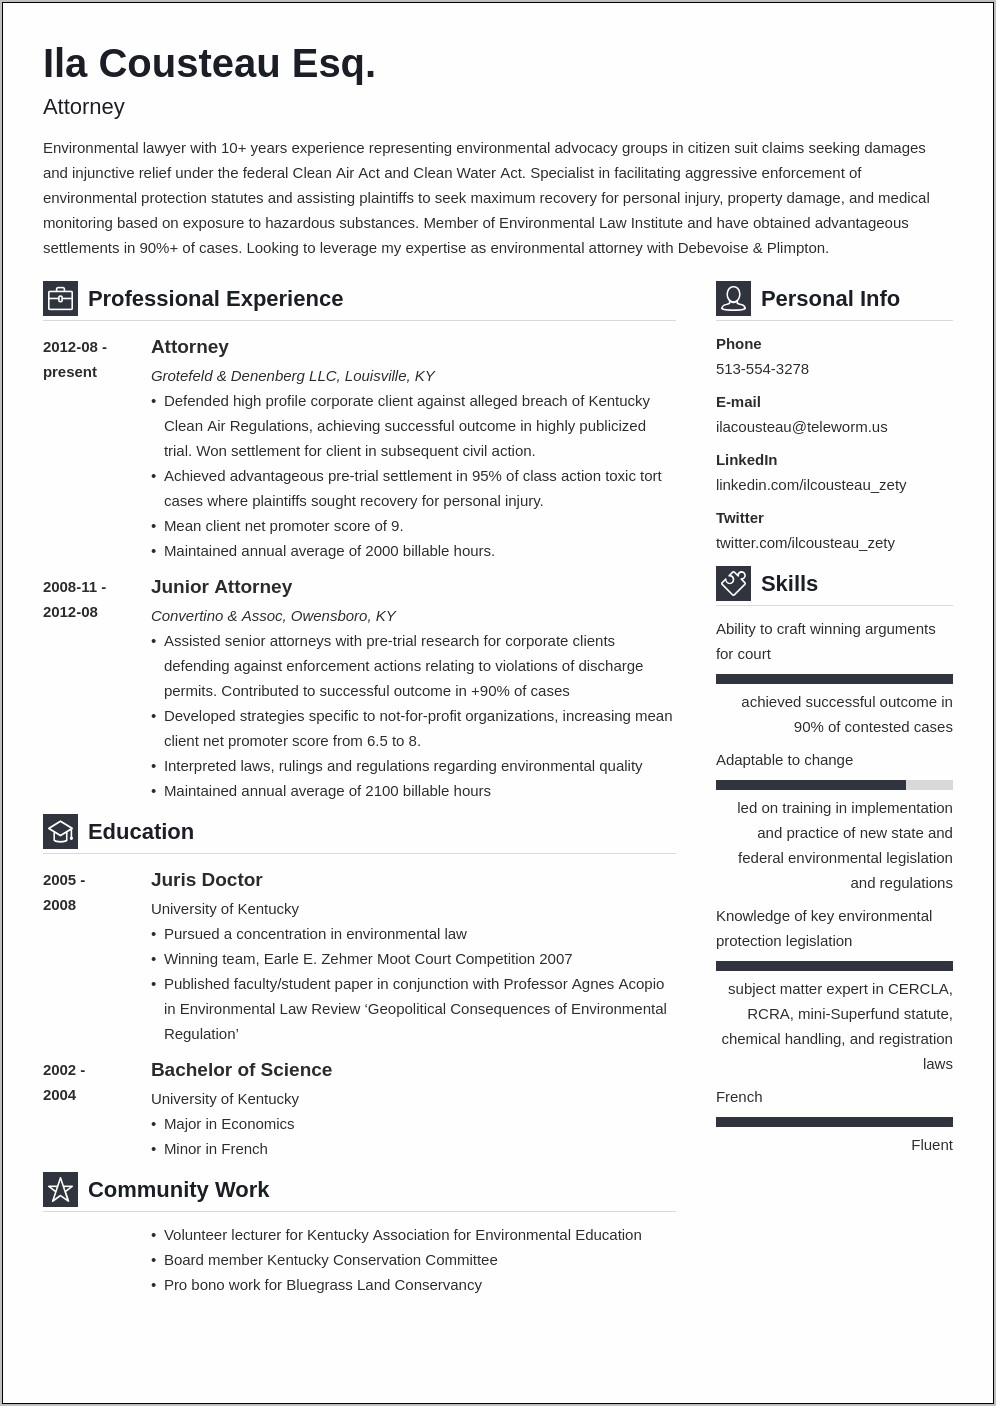 Law Student Resume With No Legal Experience Reddit